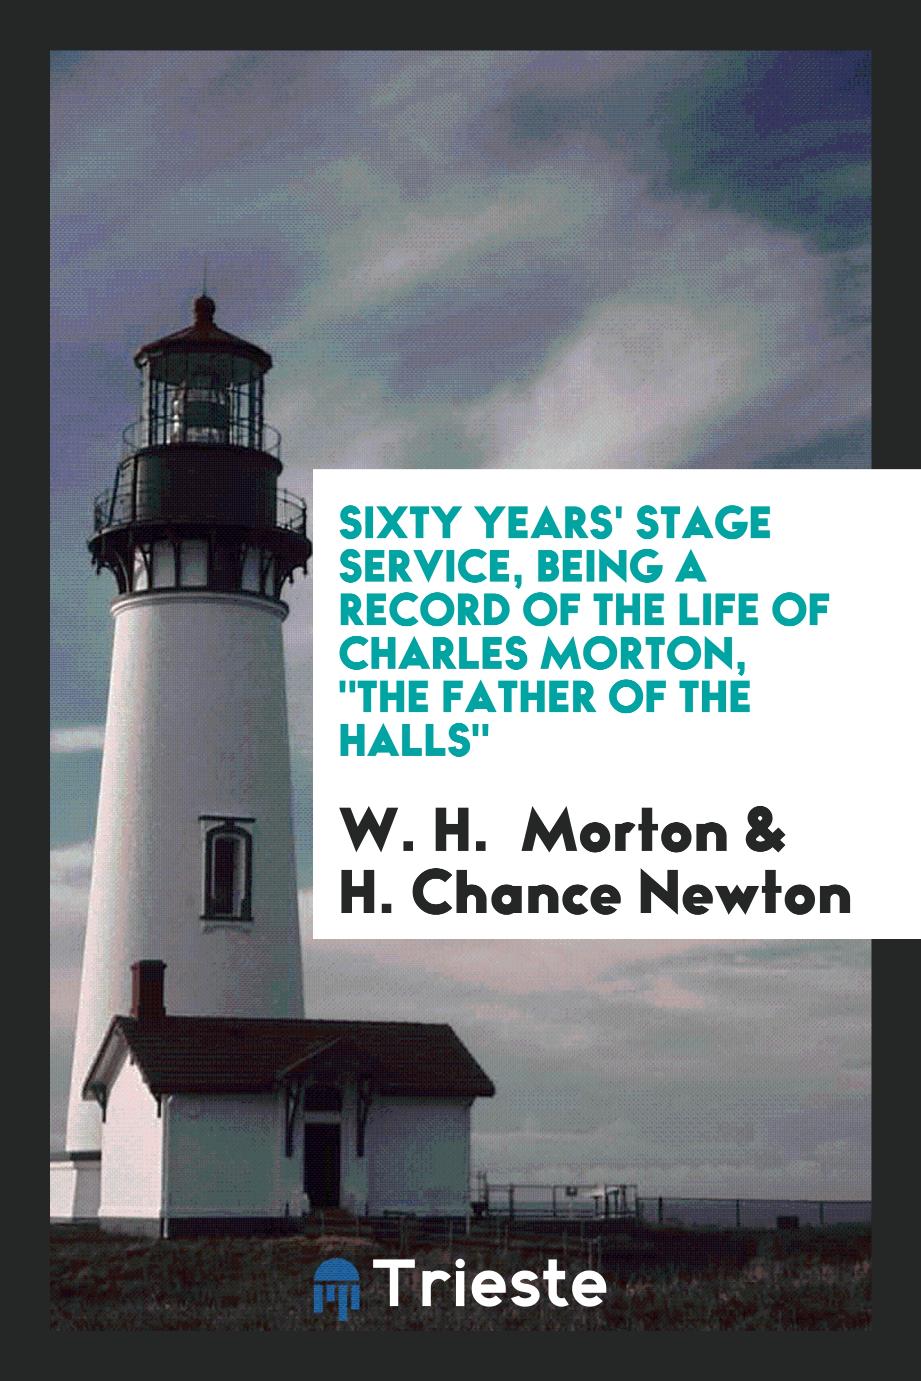 Sixty Years' Stage Service, Being a Record of the Life of Charles Morton, "The Father of the Halls"